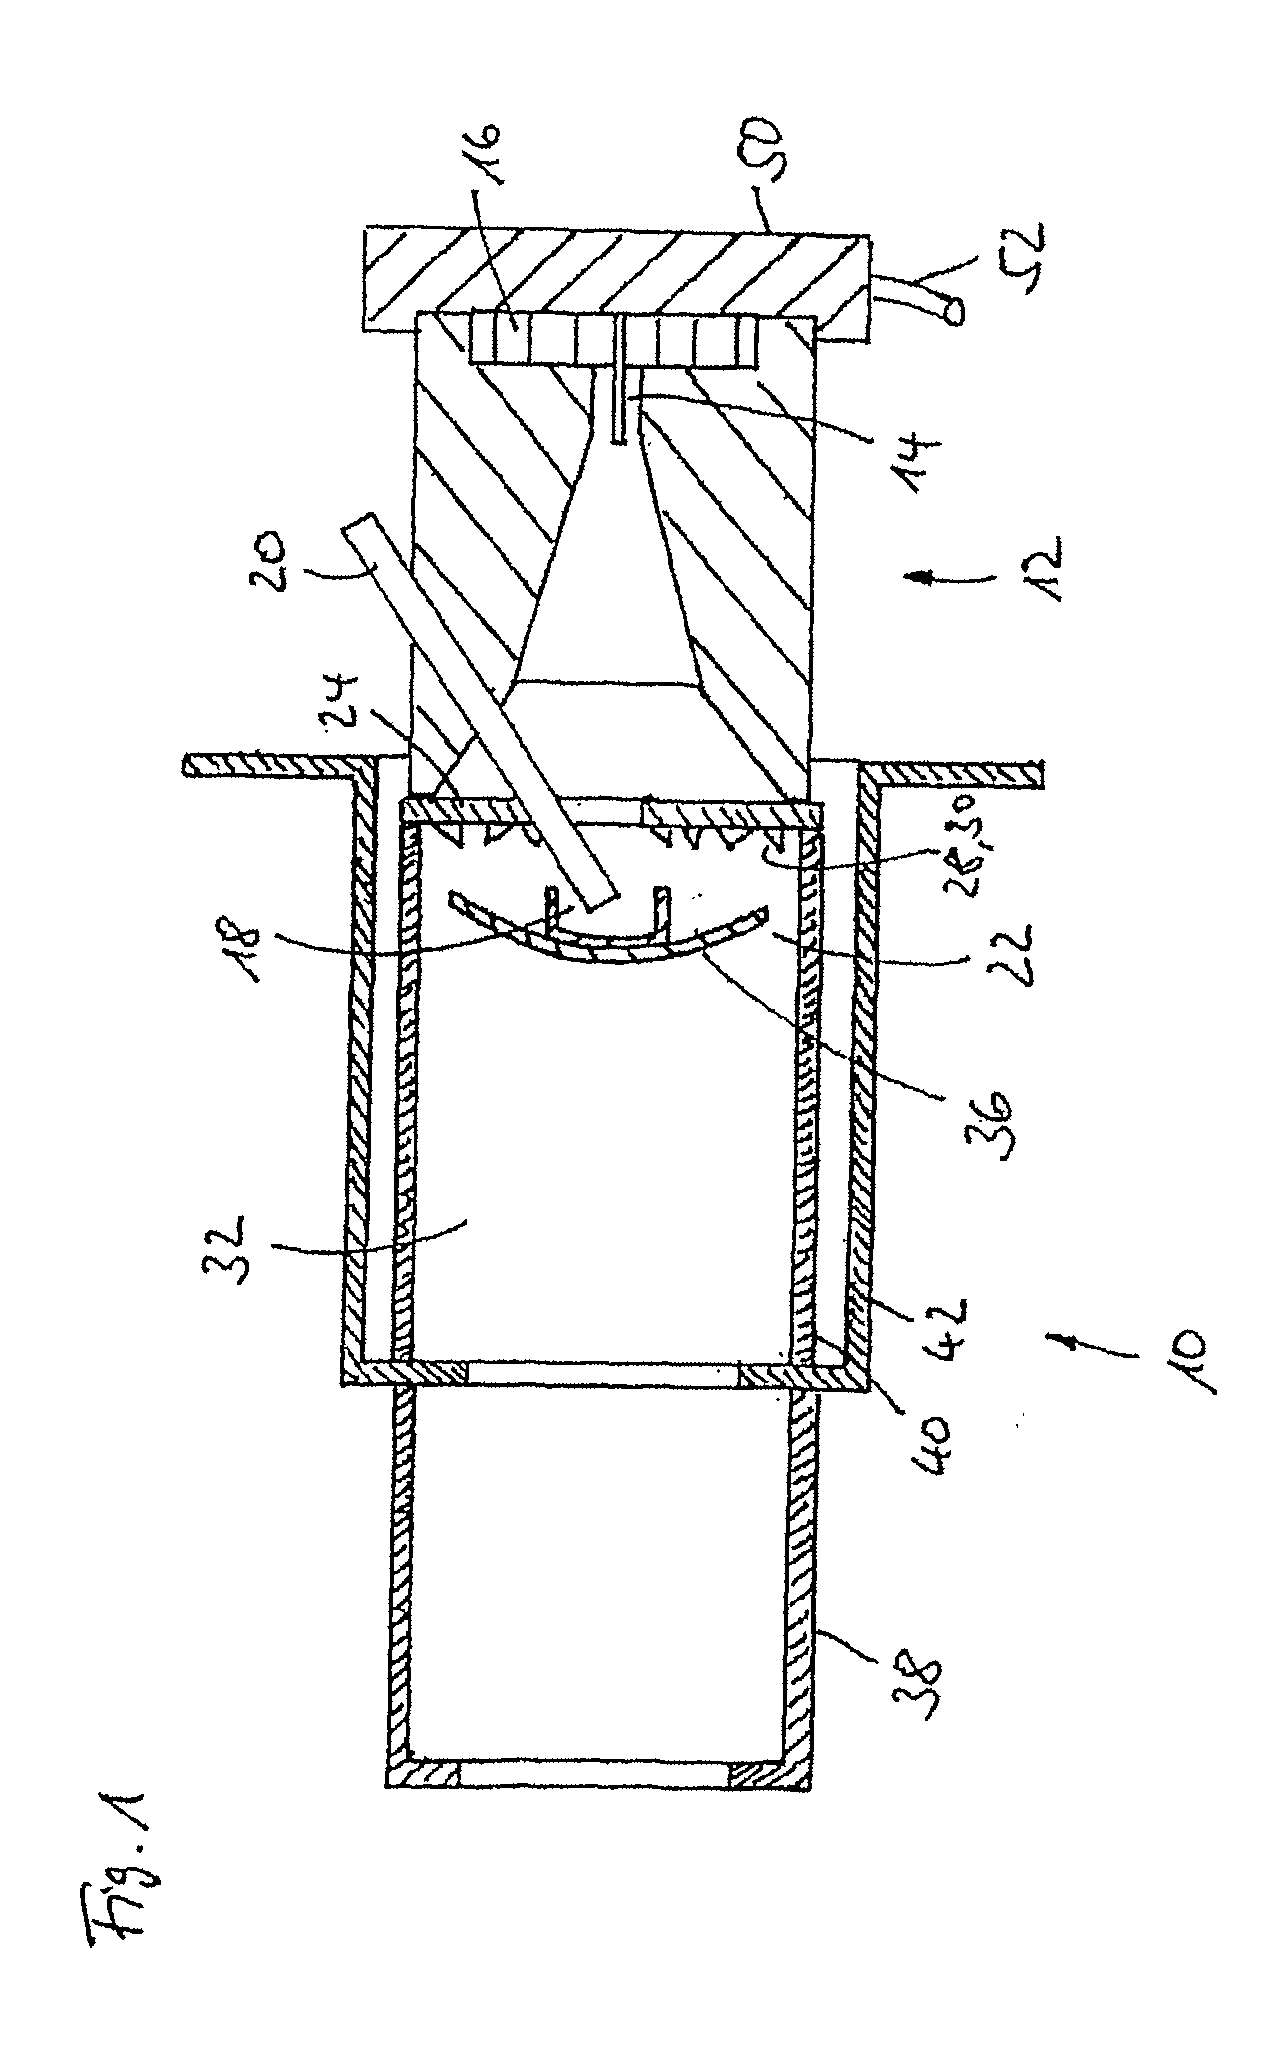 Burner for a heater with improved baffle plate